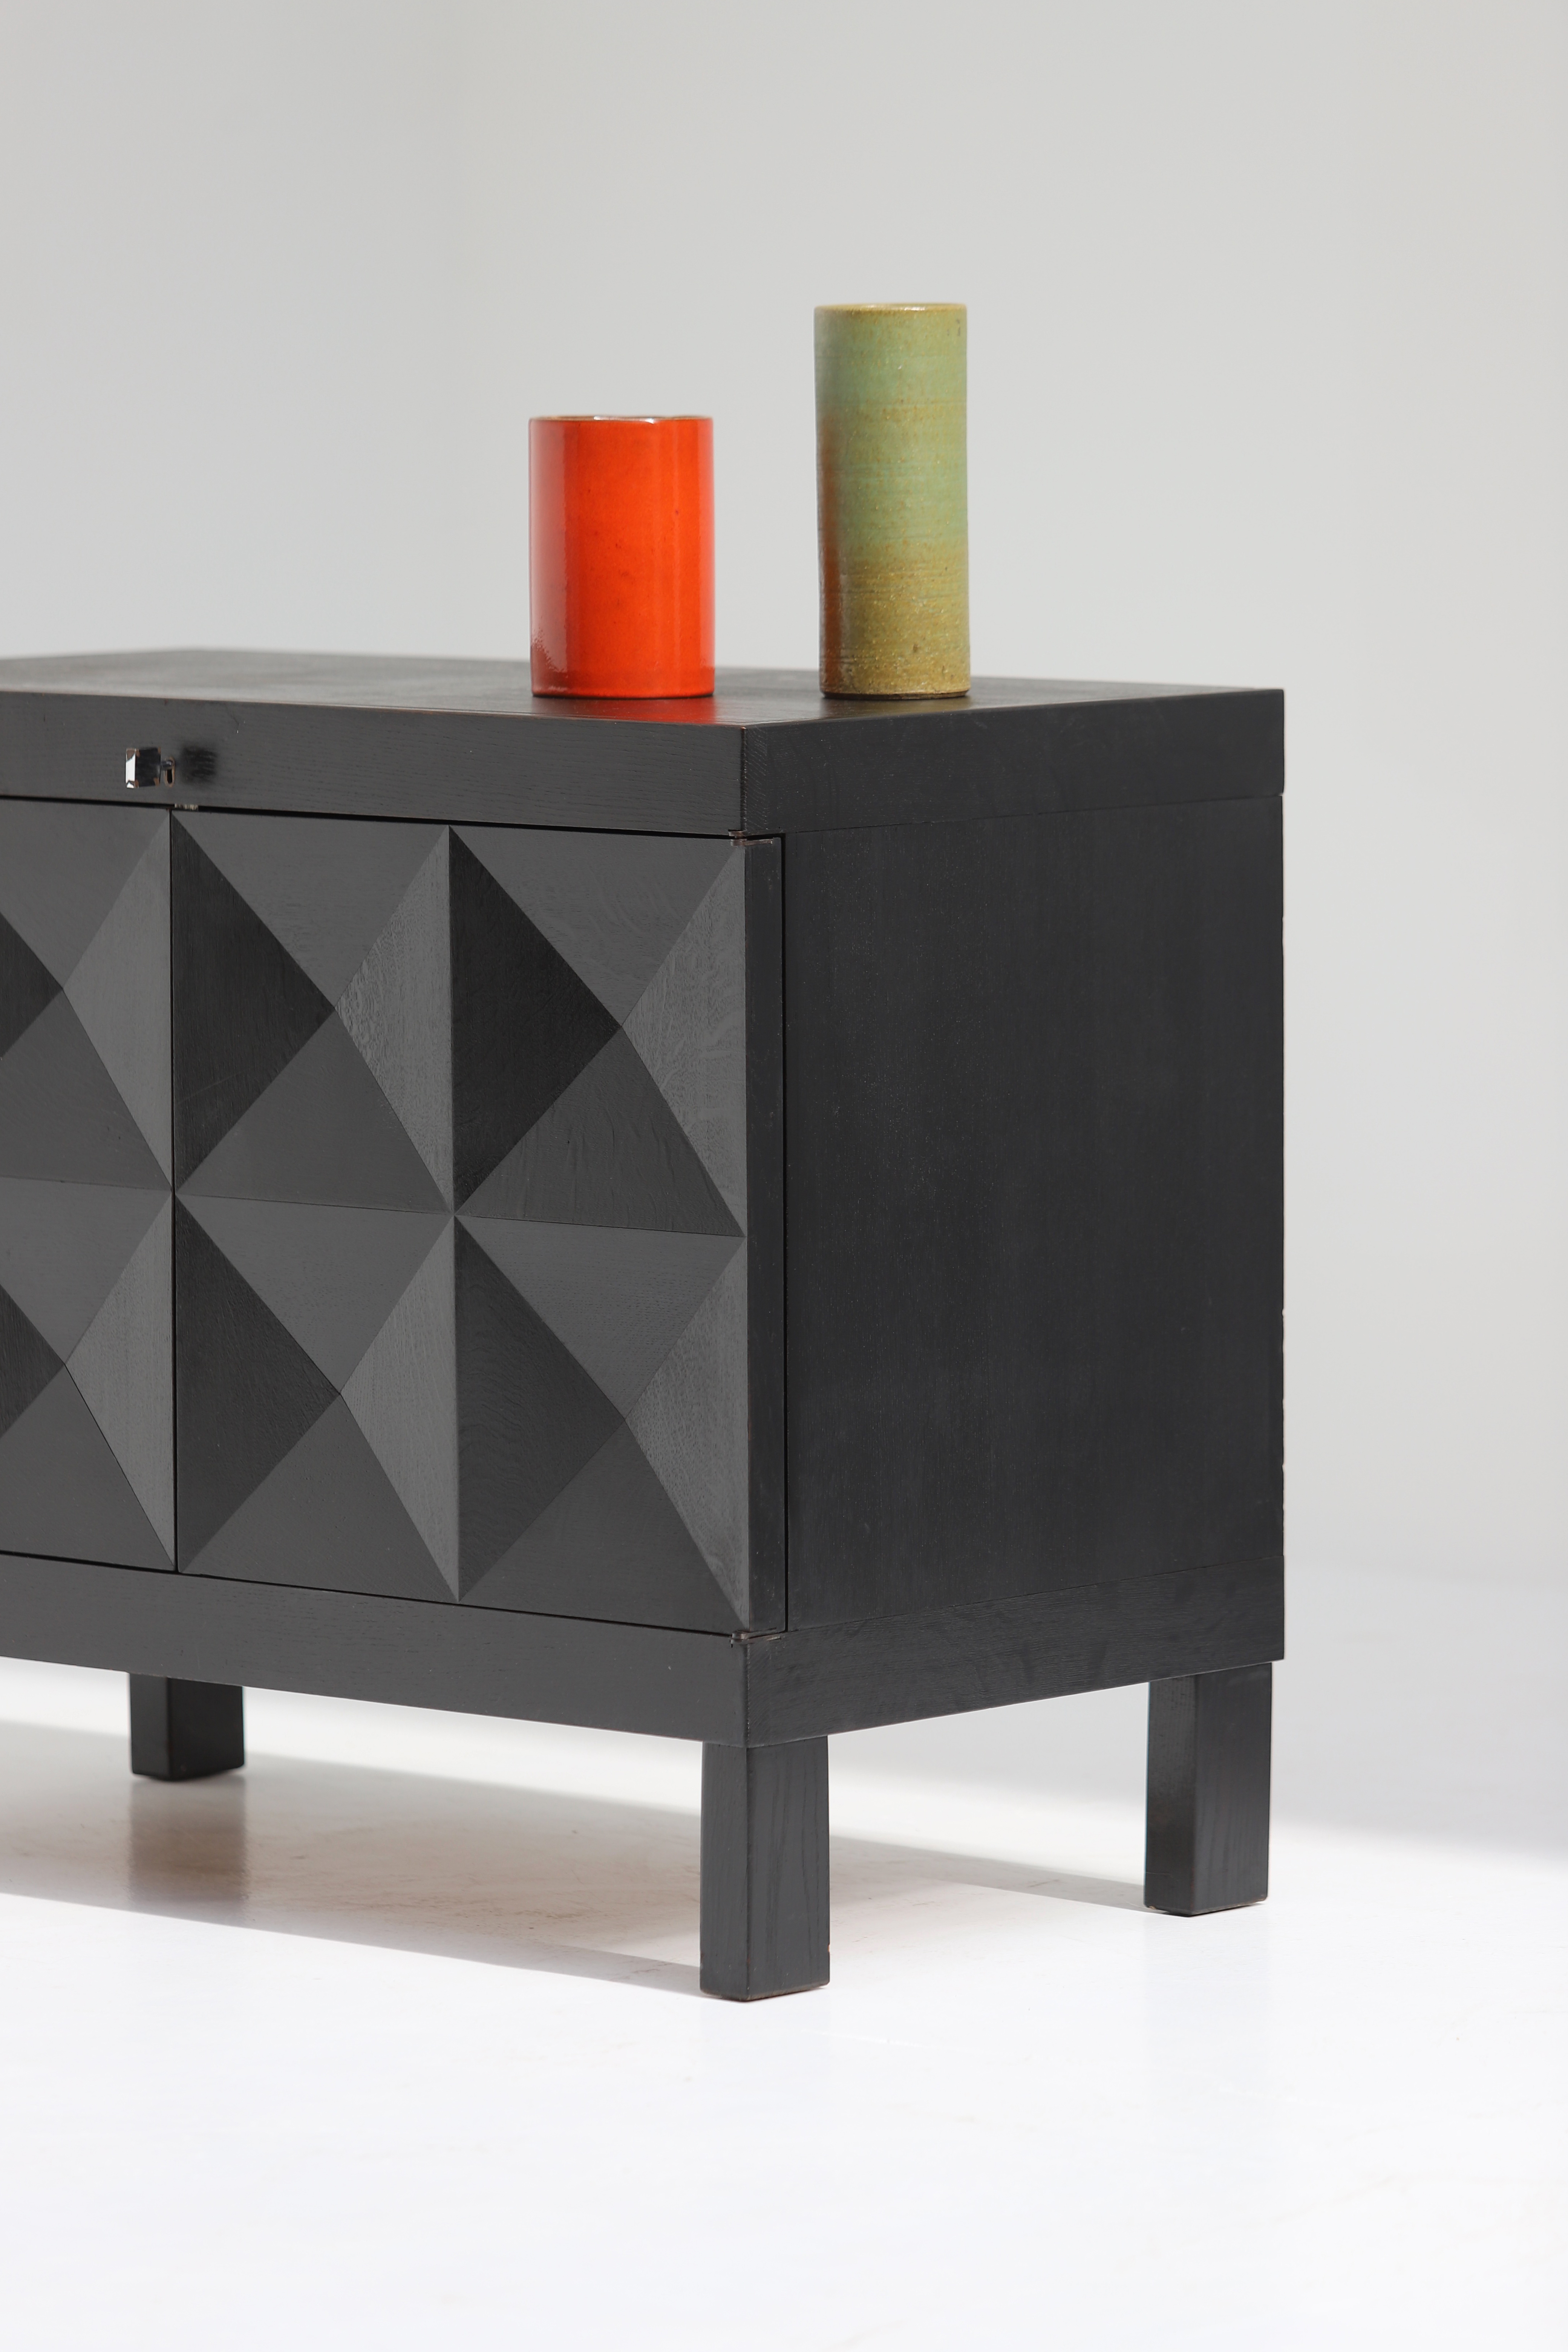 quality crafted cabinet with op-art doors designed by J. Batenburg for MI, Belgium 1969.image 4